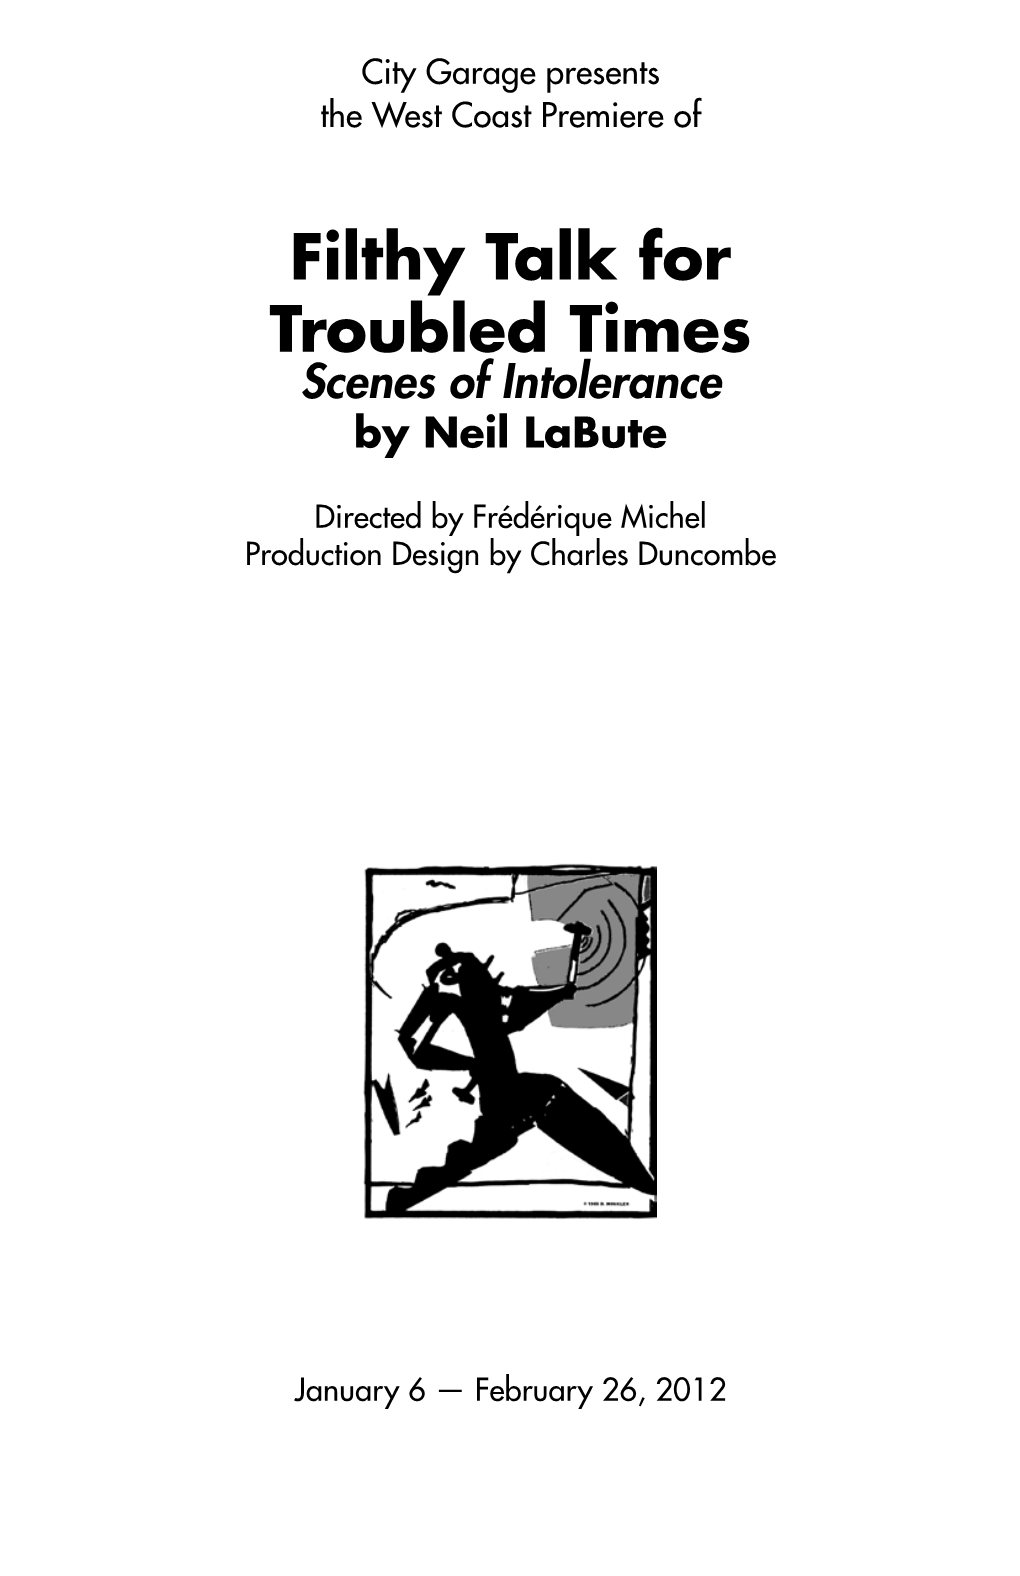 Filthy Talk for Troubled Times Scenes of Intolerance by Neil Labute